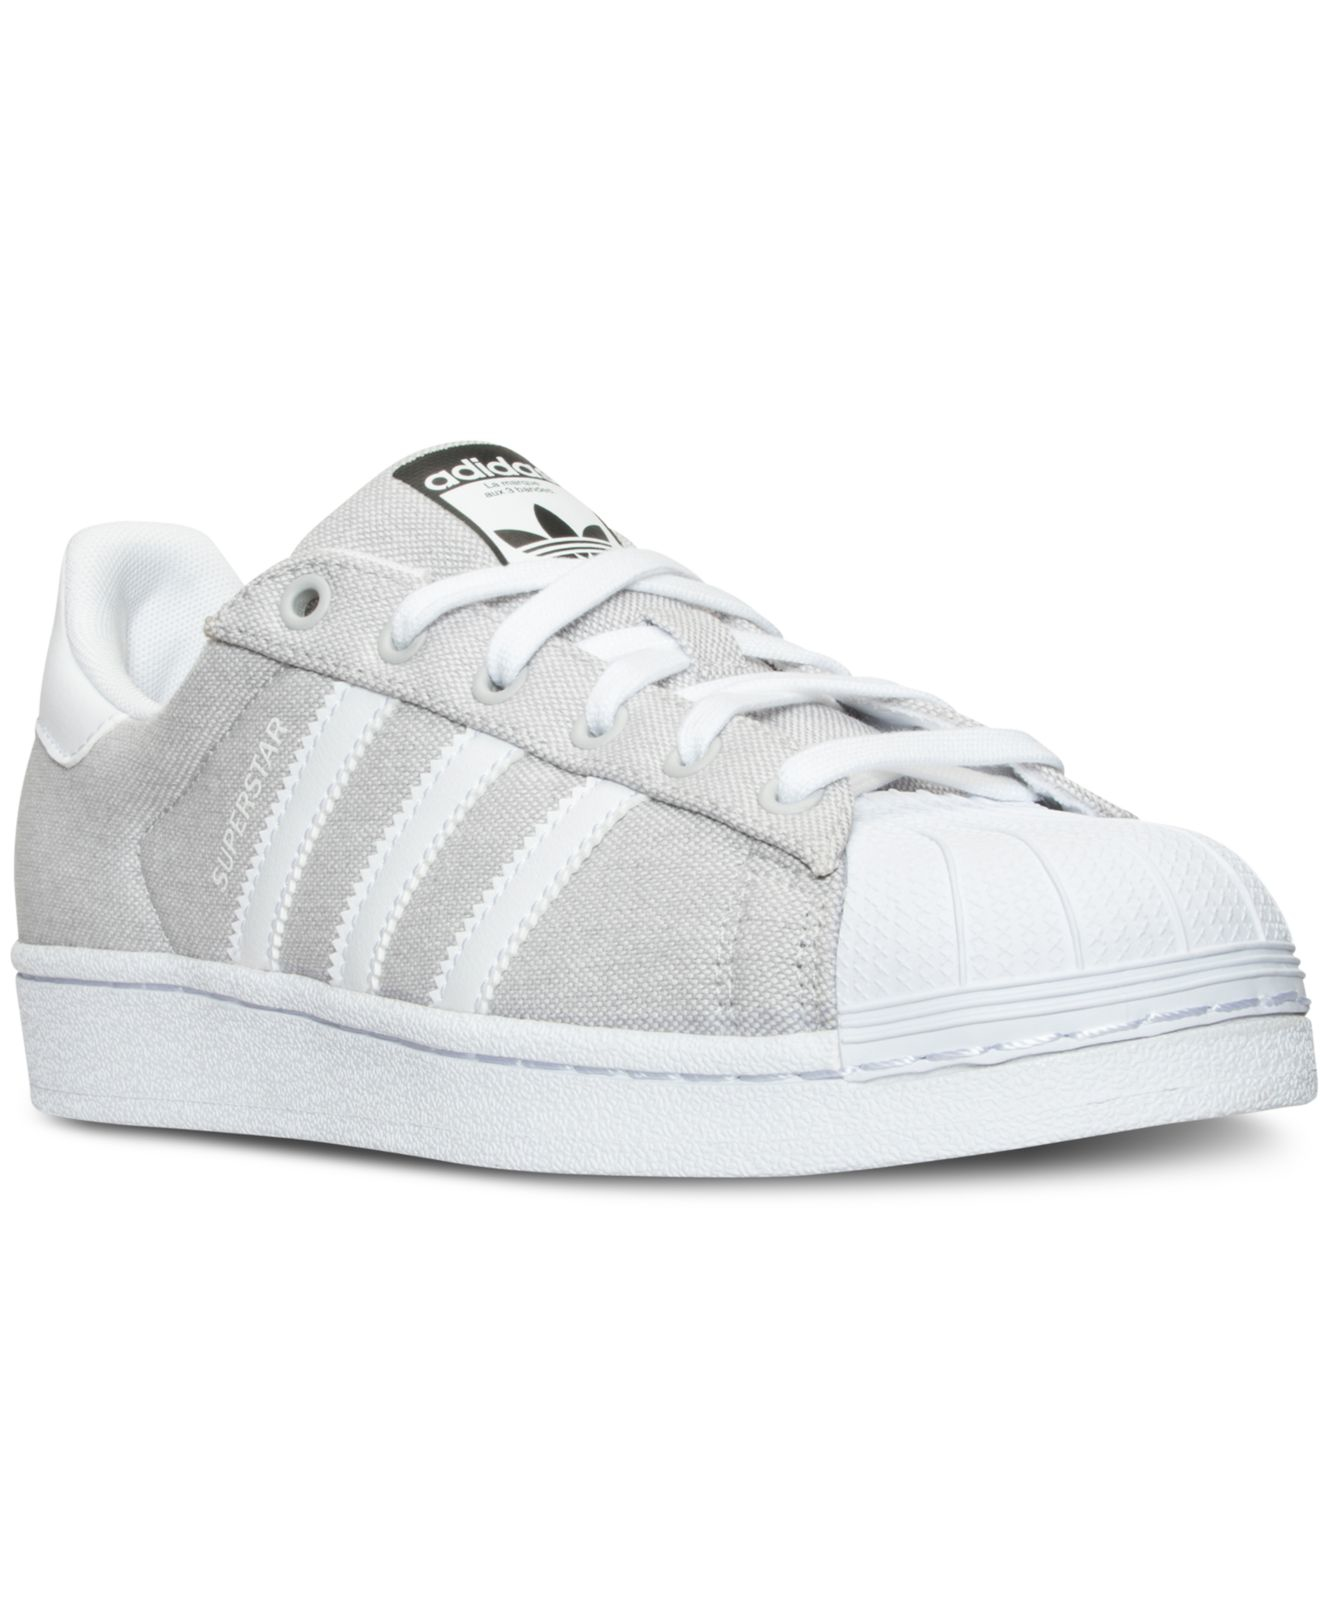 Adidas originals Women's Superstar Casual Sneakers From Finish Line in ...